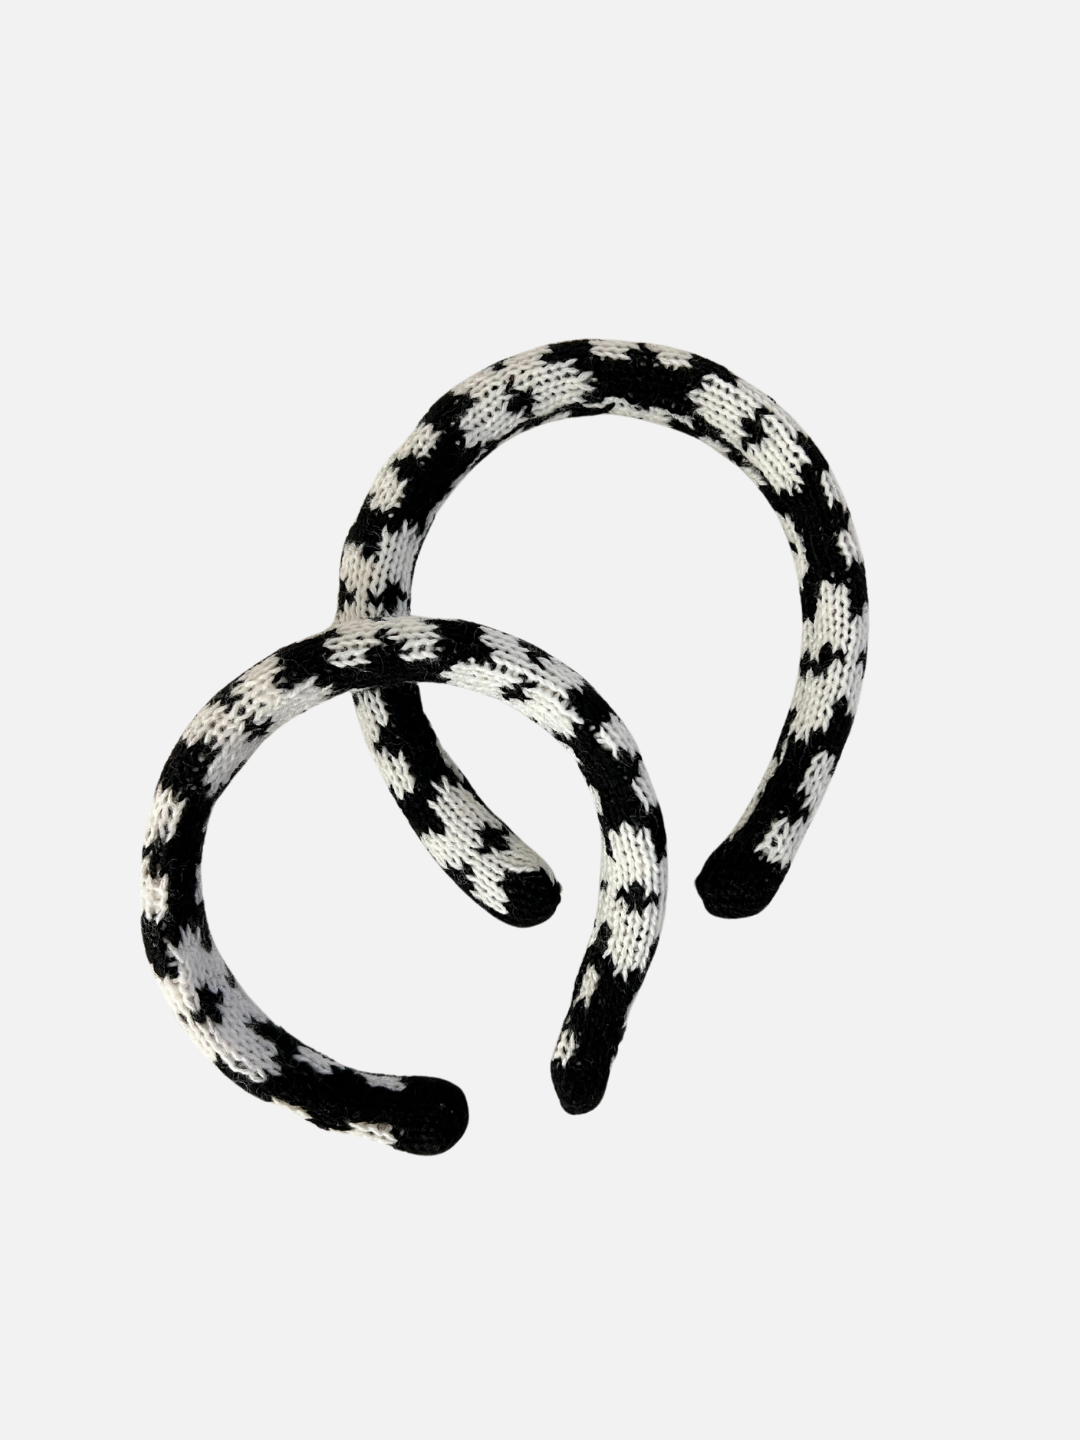 Black/White Blossoms | Two sizes of kids' knitted headband in pattern of white flowers on a black background